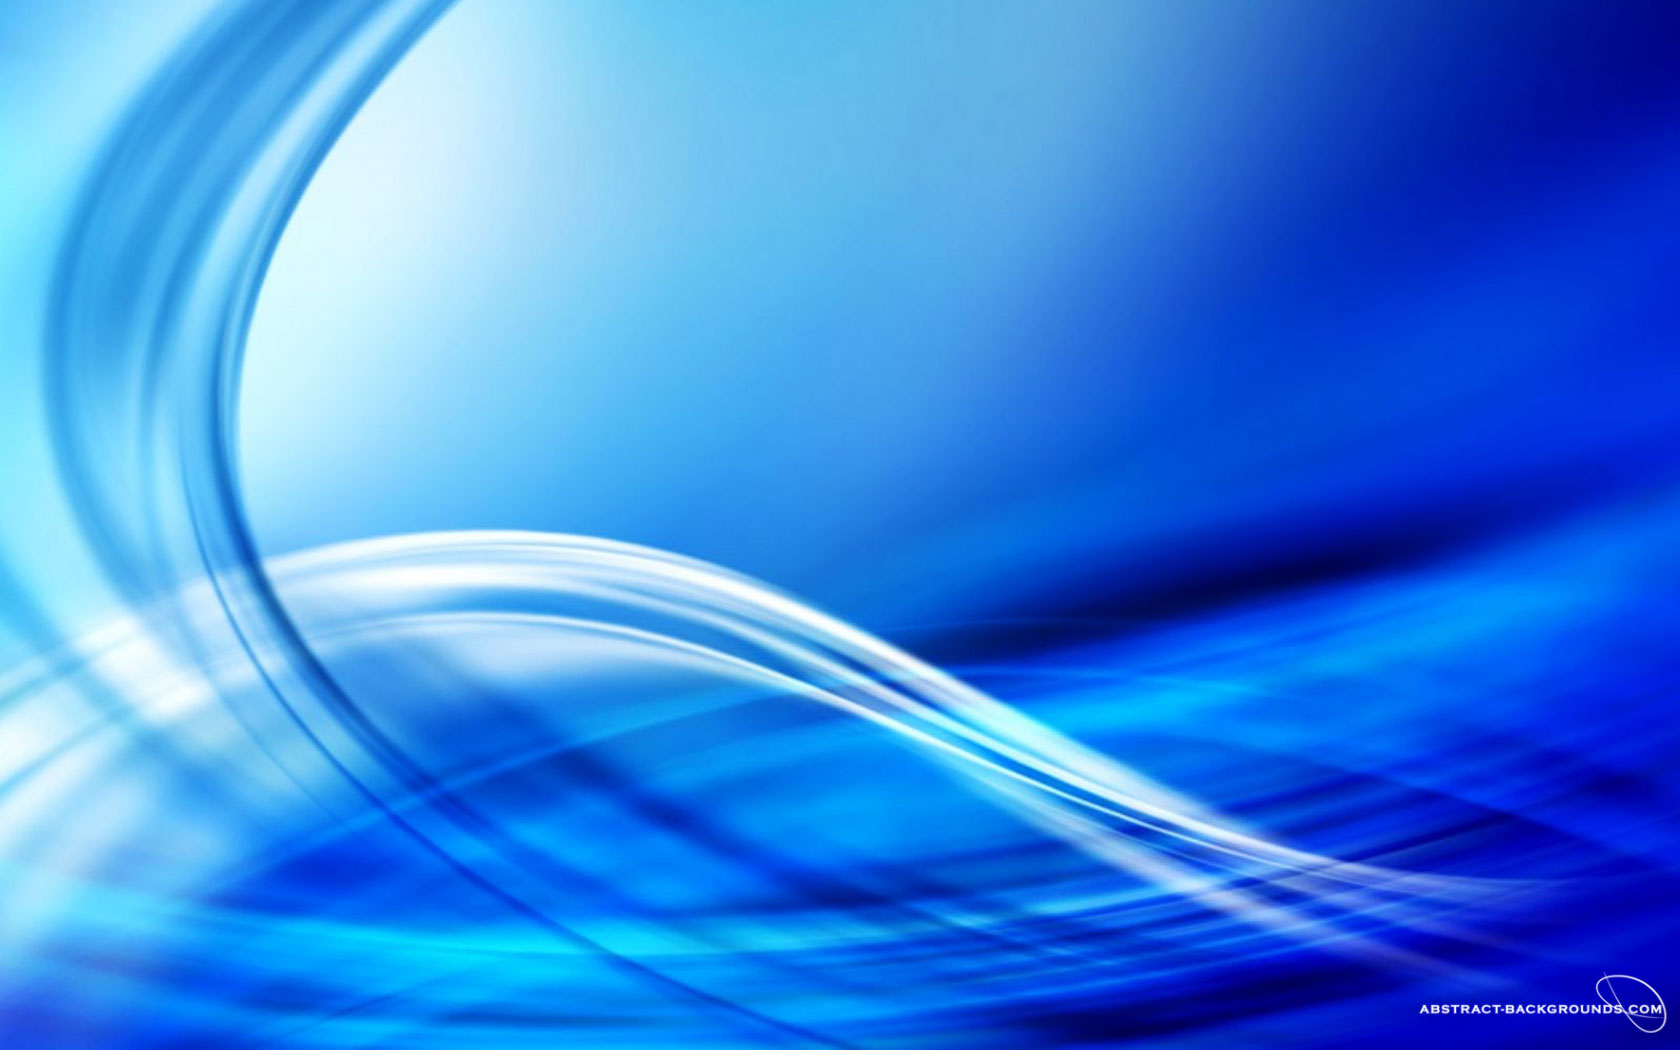 Abstract Backgrounds Blue 3223 Hd Wallpapers in Abstract   Imagesci